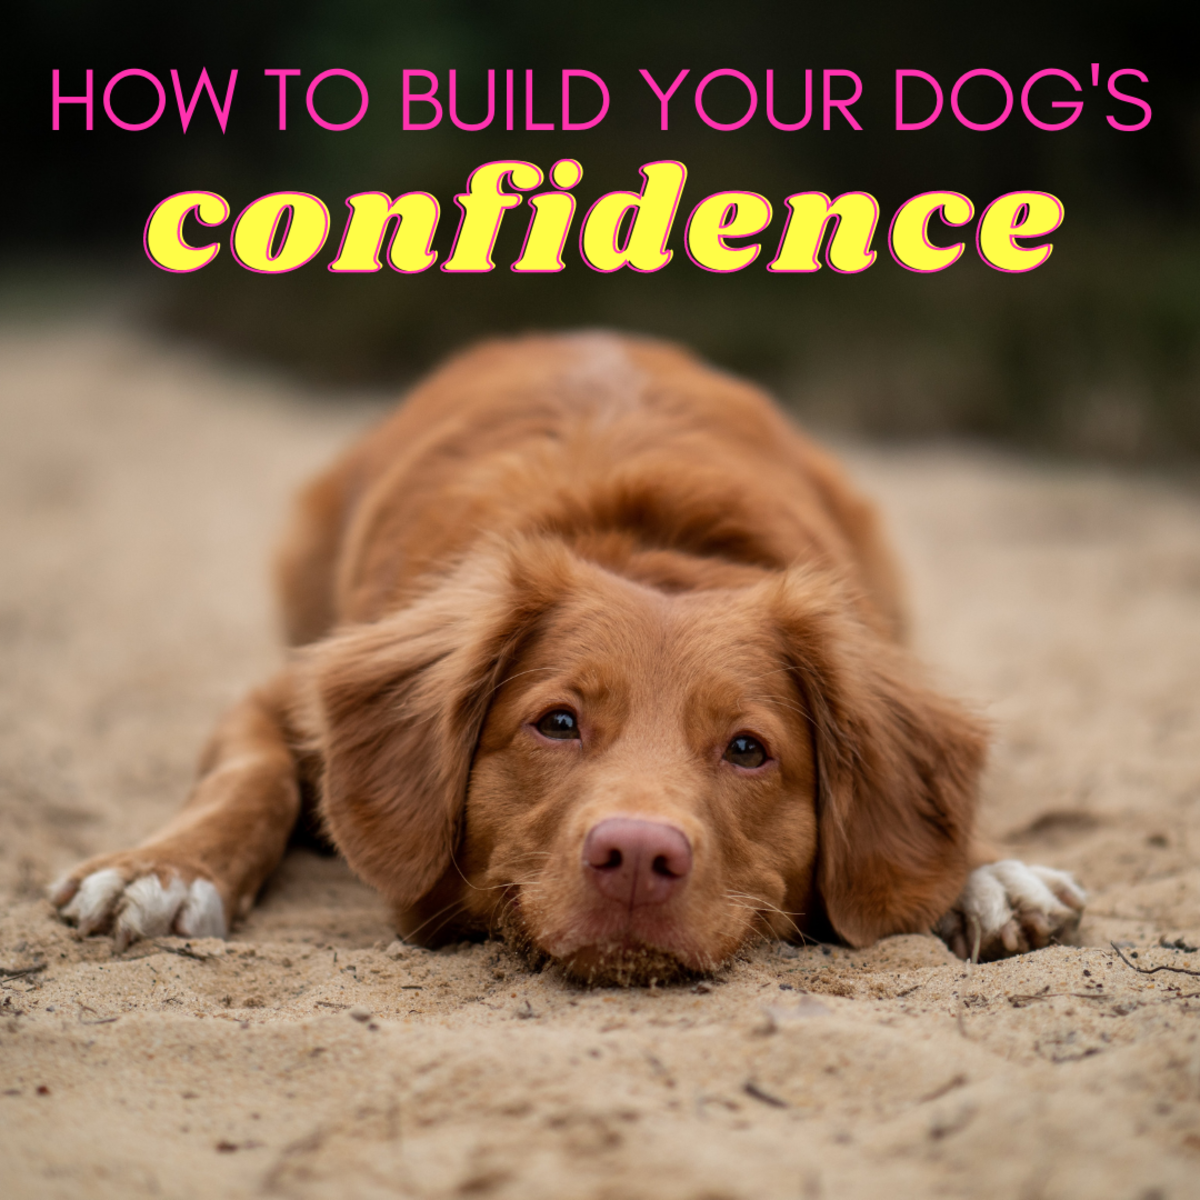 How to Help a Submissive Dog Build Confidence